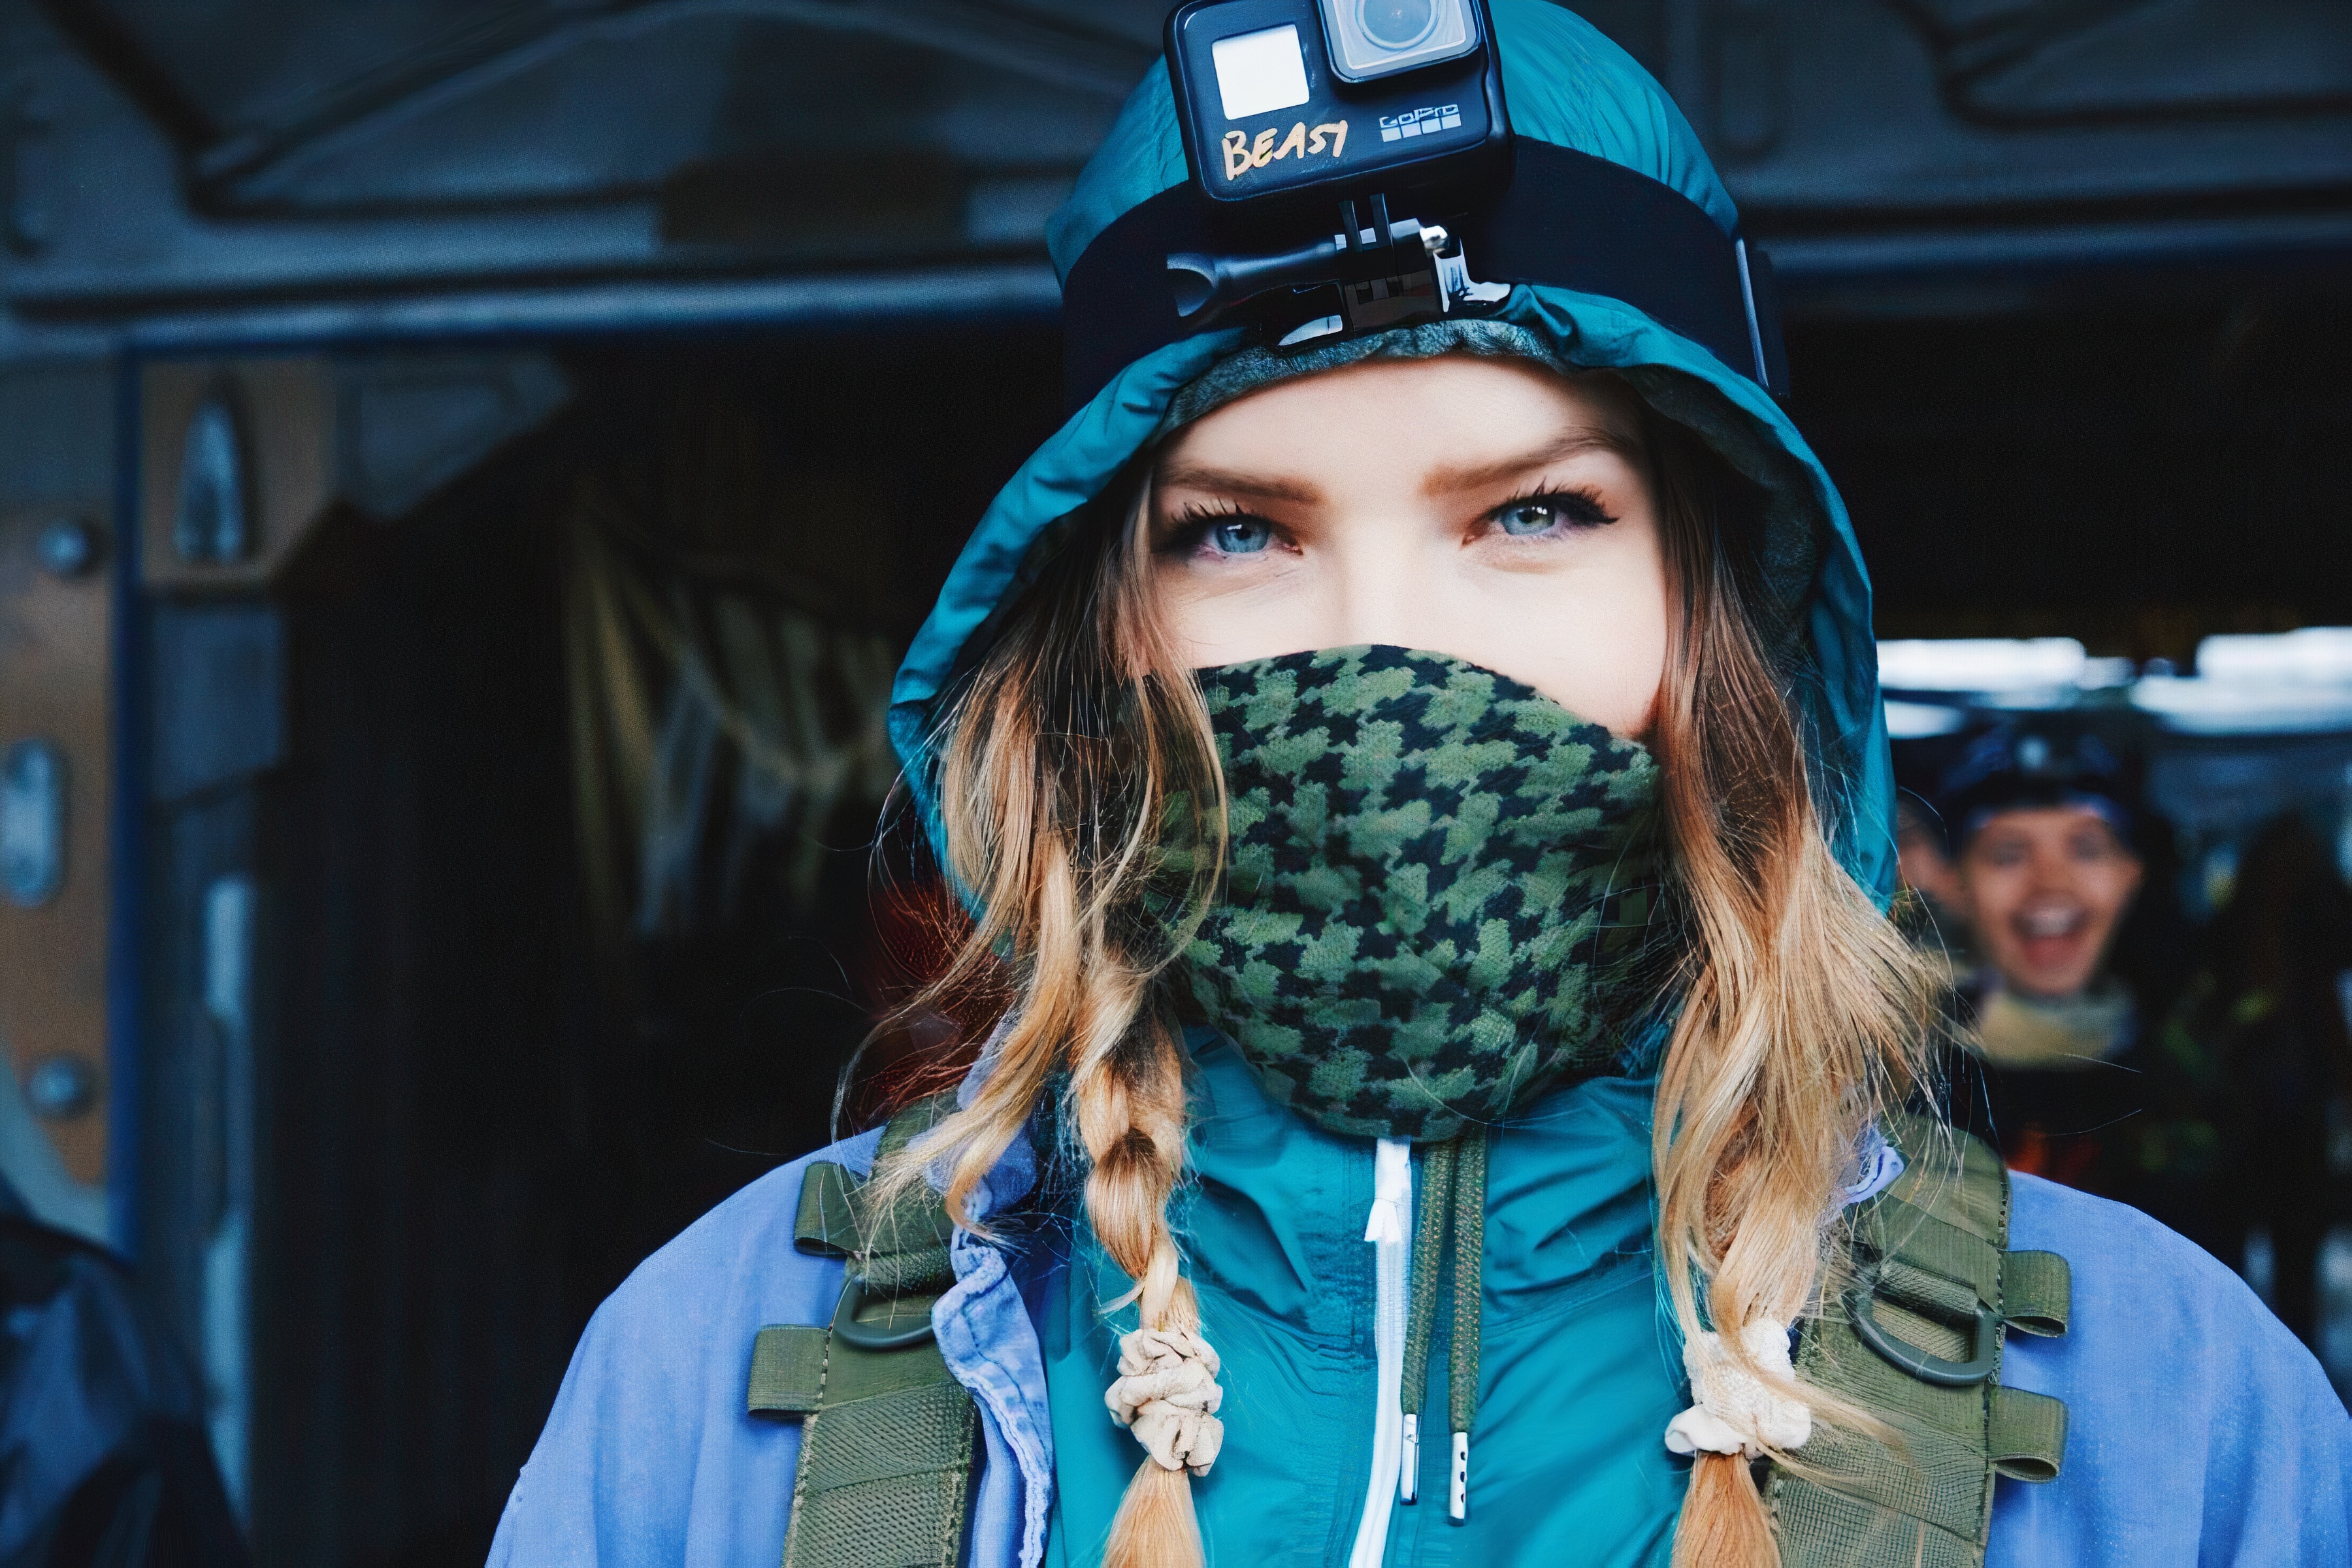 People 3600x2400 KittyPlays blue eyes women covering face blue jacket braids looking at viewer hoods blue clothing camera closeup